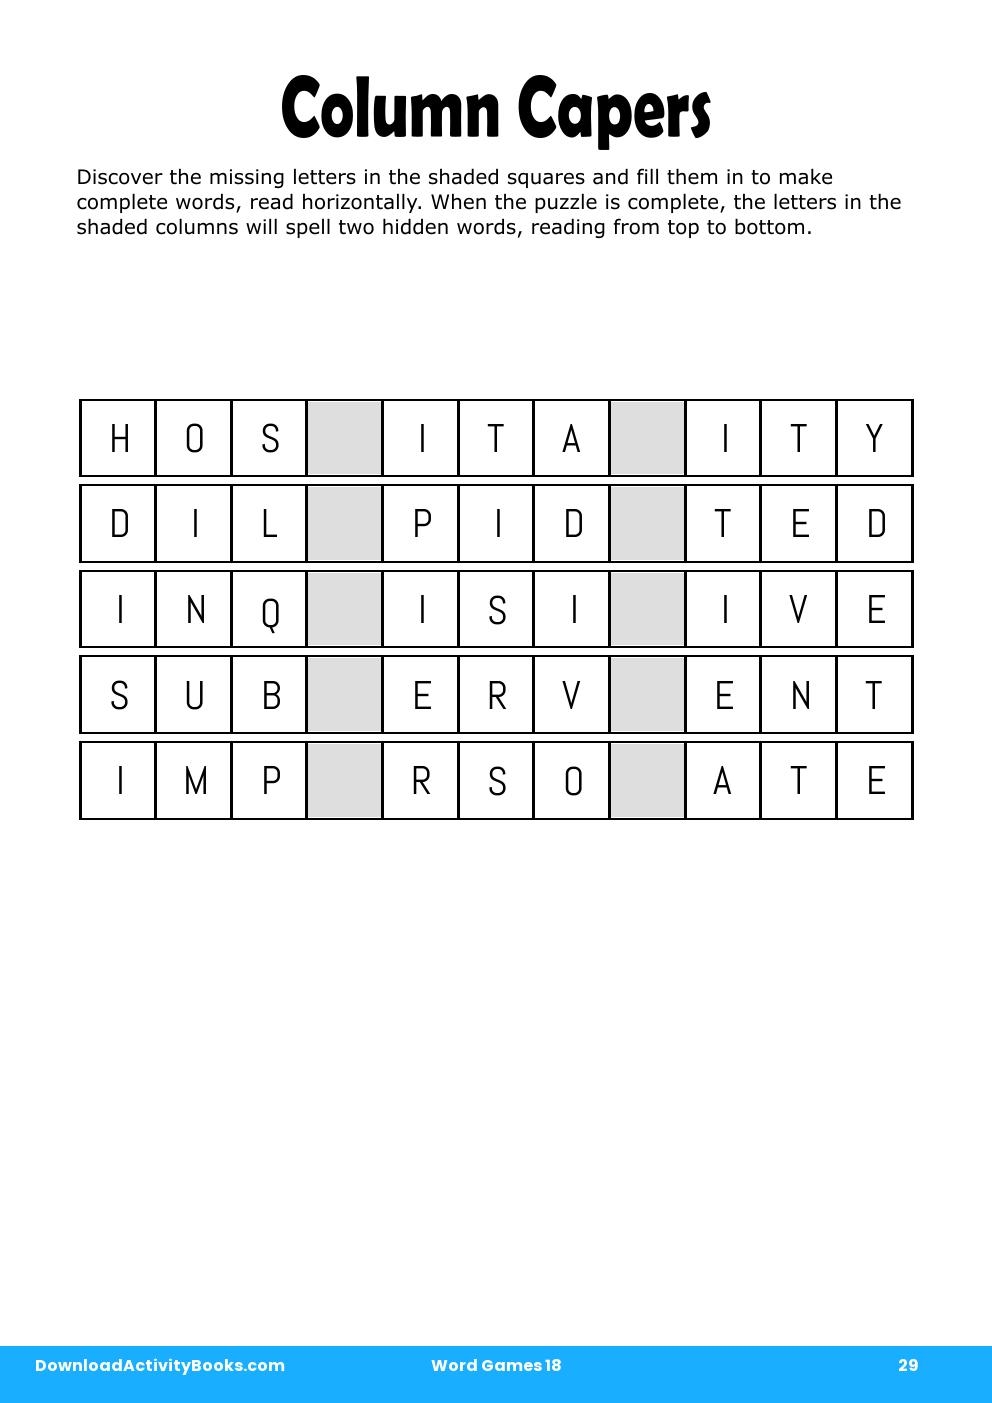 Column Capers in Word Games 18